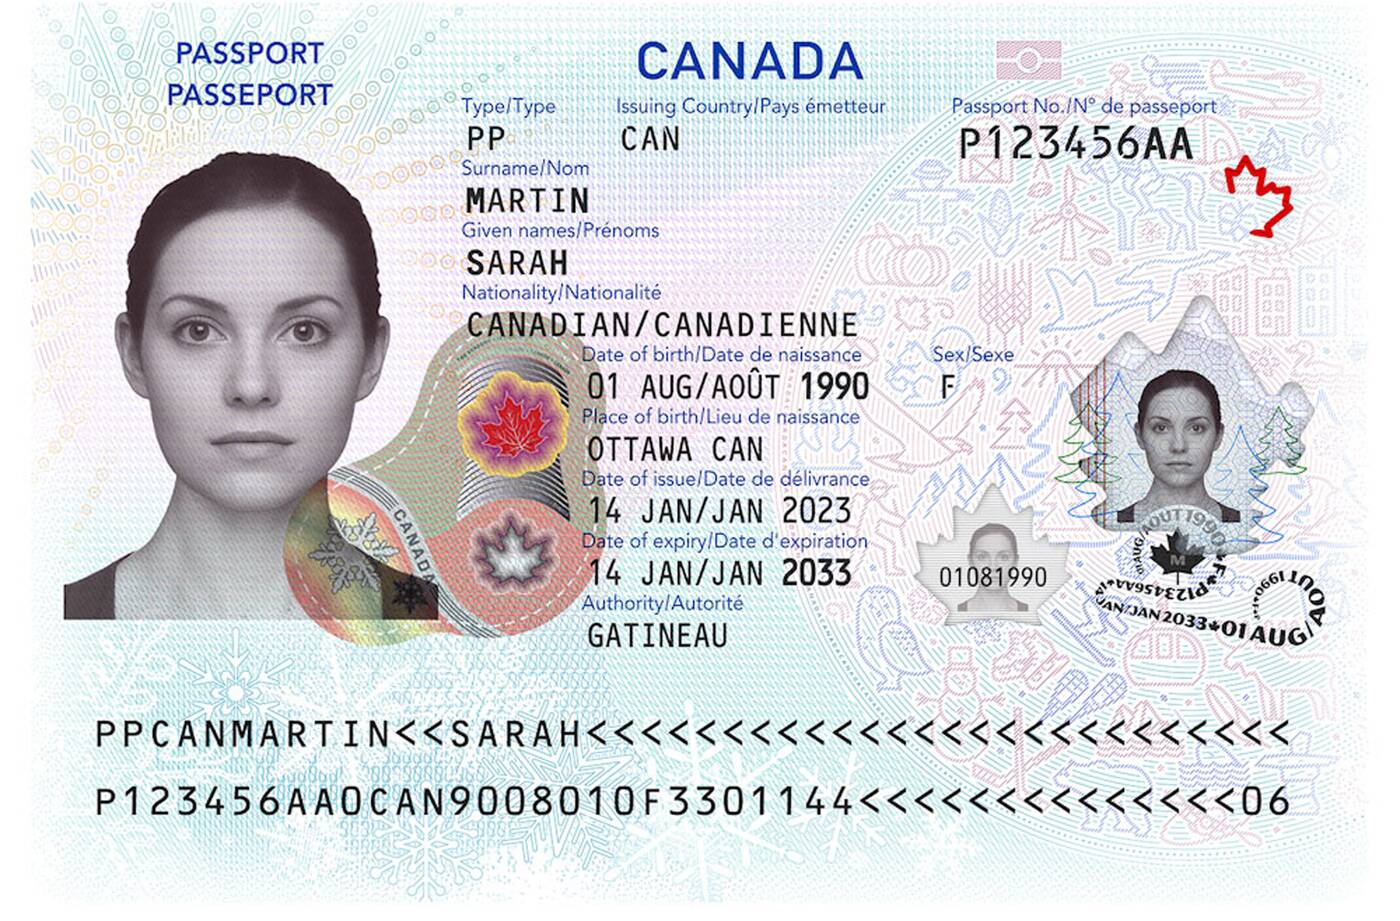 Canada just unveiled new passports with several hightech features Canada